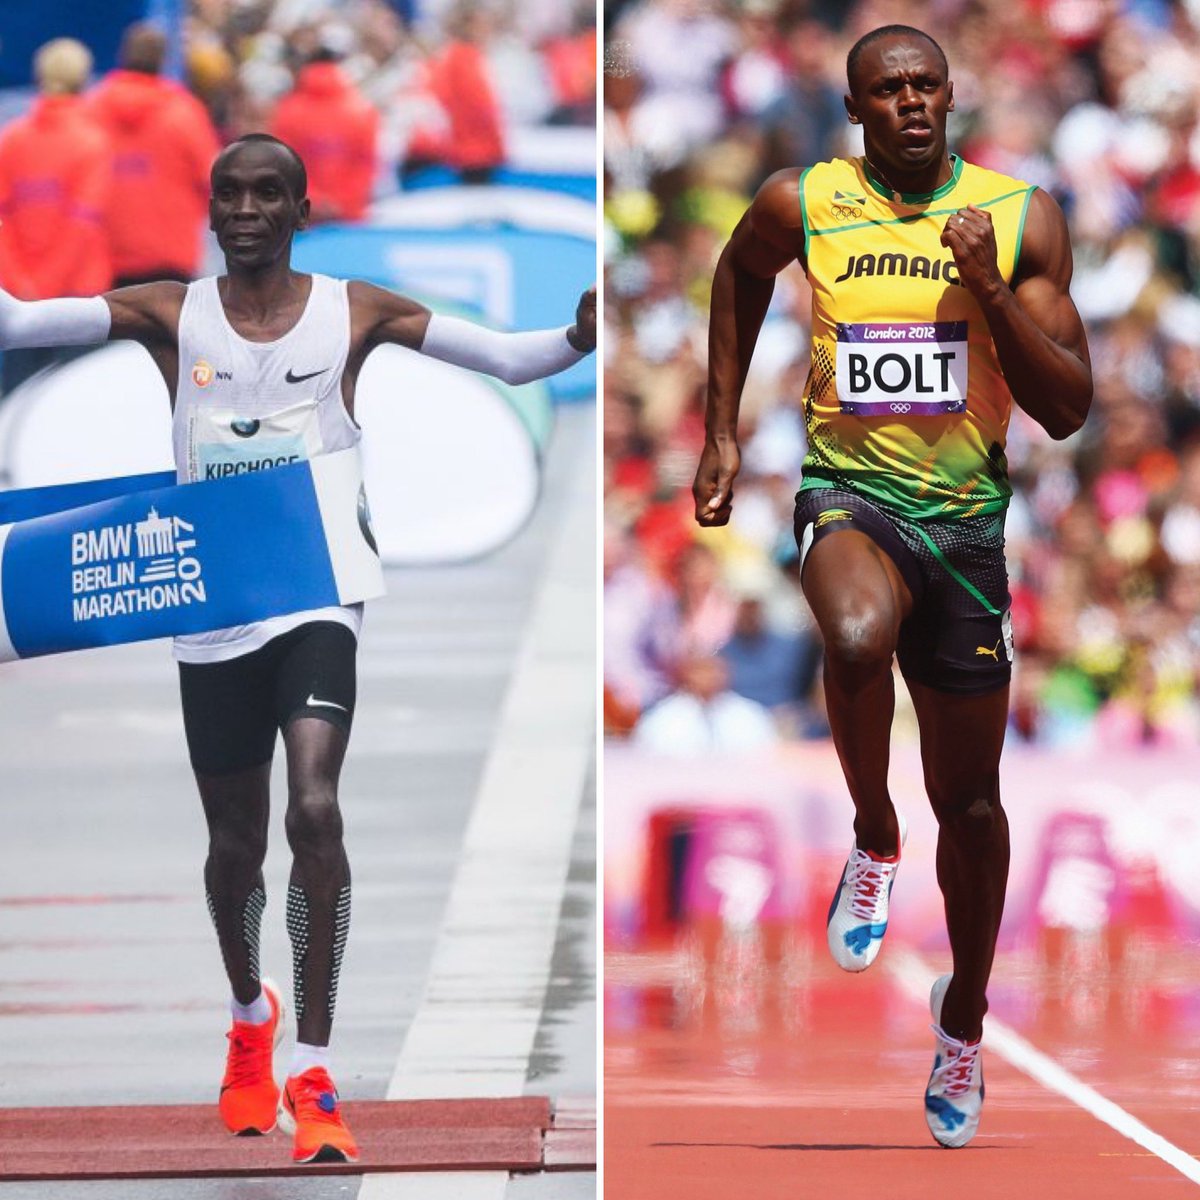 Covid19 - This is a marathon, not a sprint! These are two faces you may know. On the left is arguably one of the greatest long distance (marathon) runners of all time. On the right is without a doubt, the fastest man to ever live; he’s a sprint specialist.A thread...